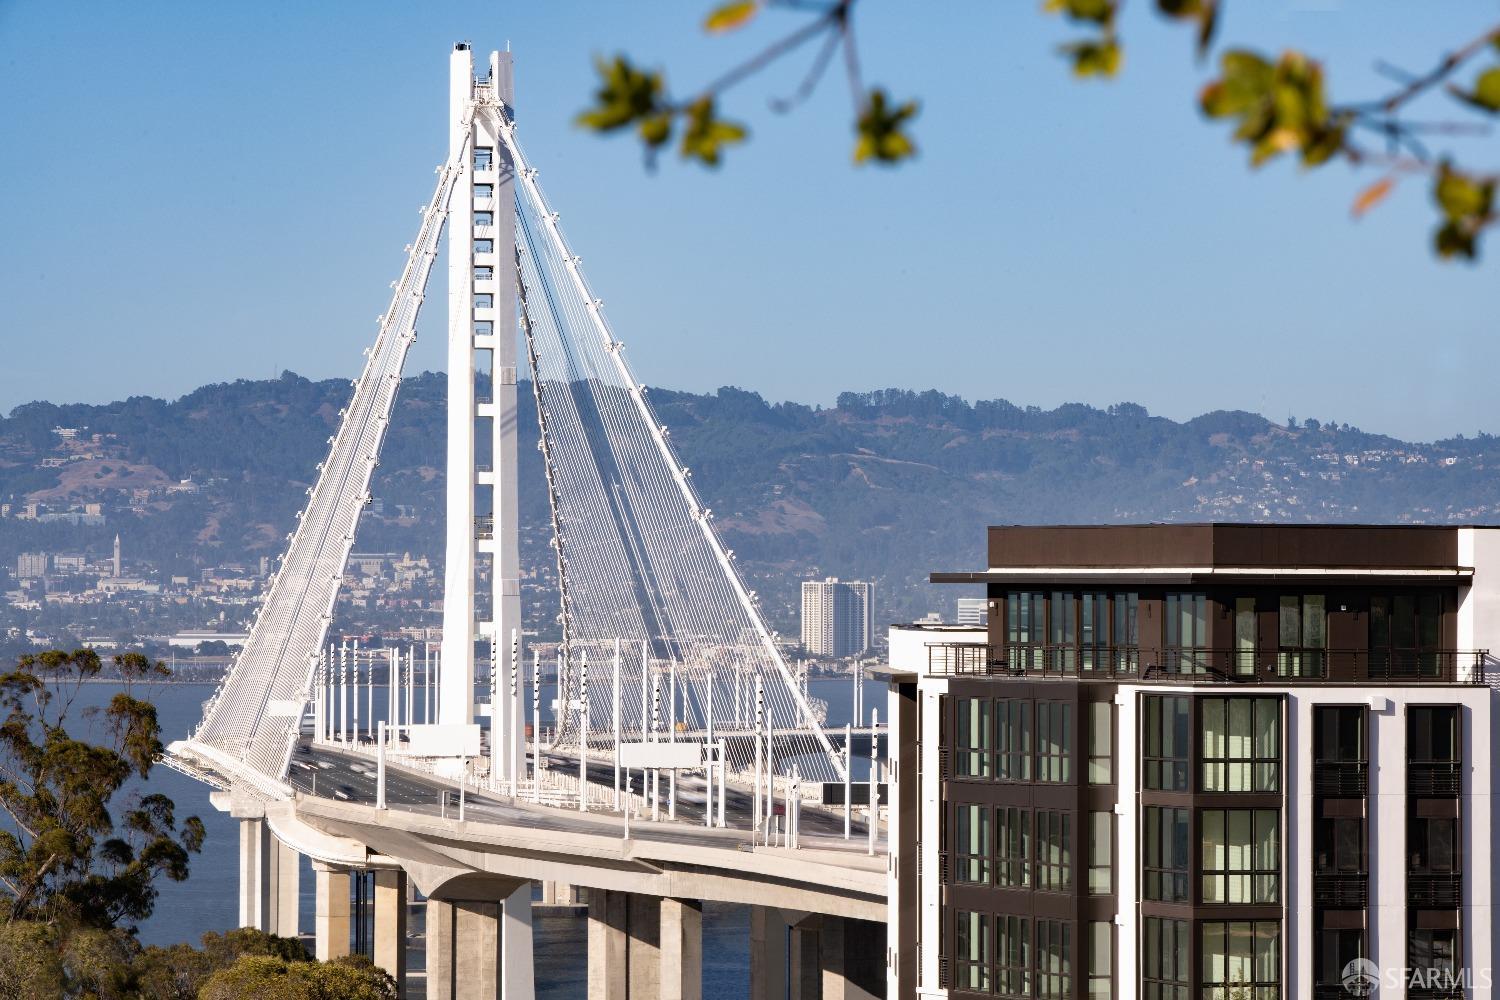 The Bristol Condominium is a luxury building of 124 residences with stunning Bay Area views.